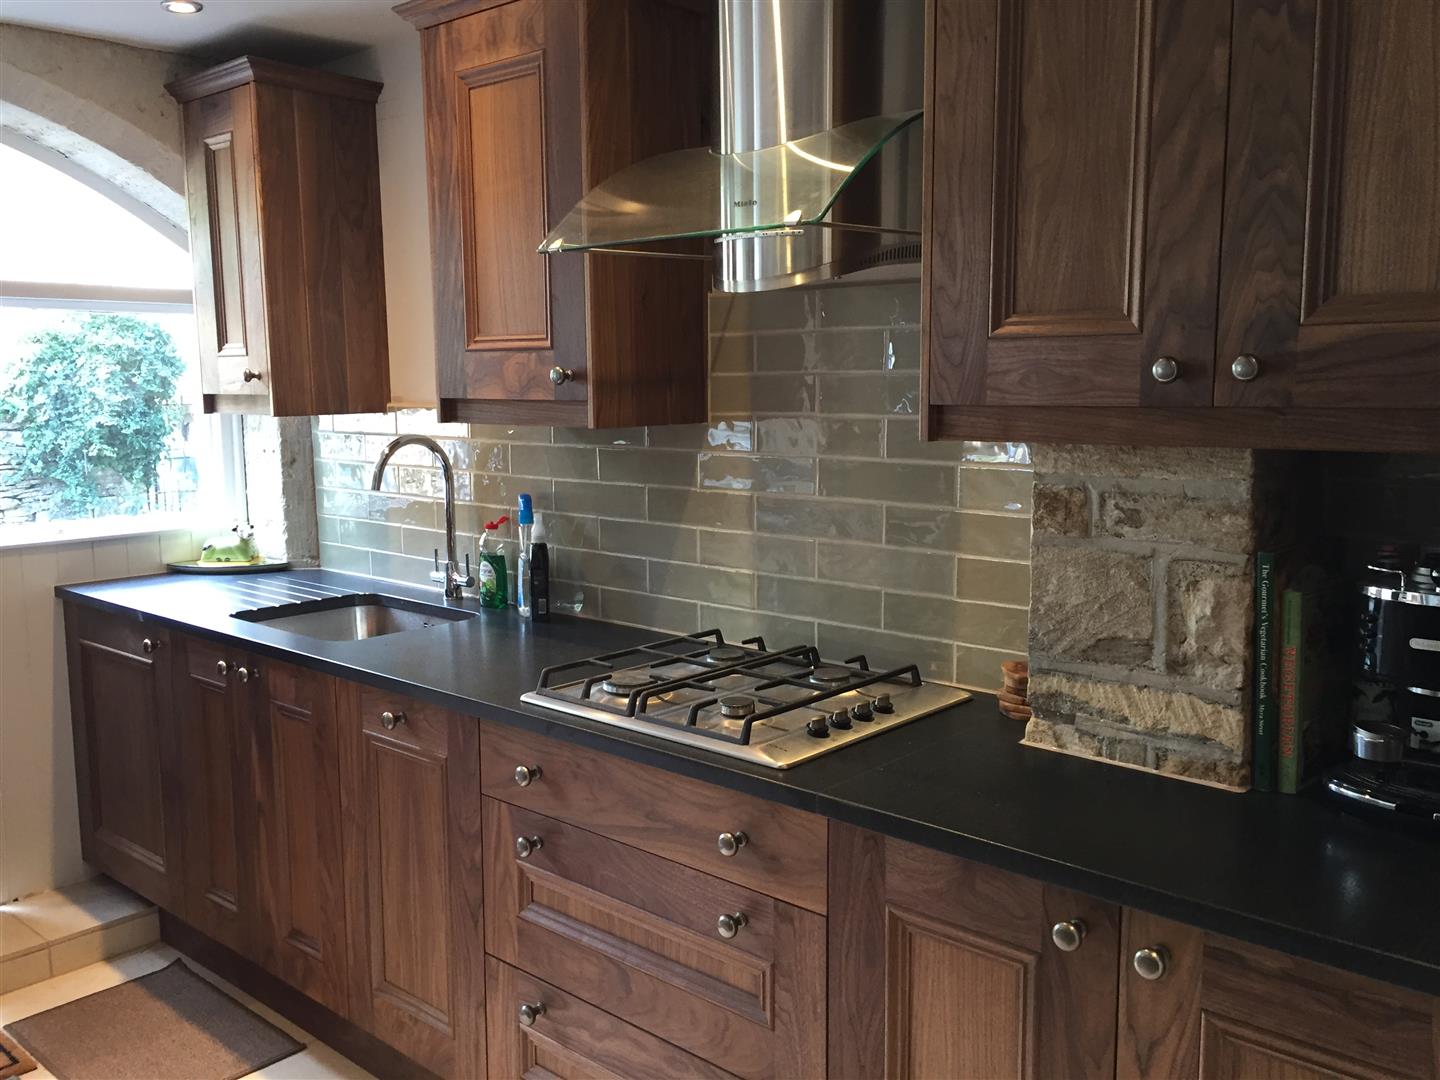 Redbrook kitchens design and install bespoke kitchens in Gloucestershire Compact run of walnut for a small unit